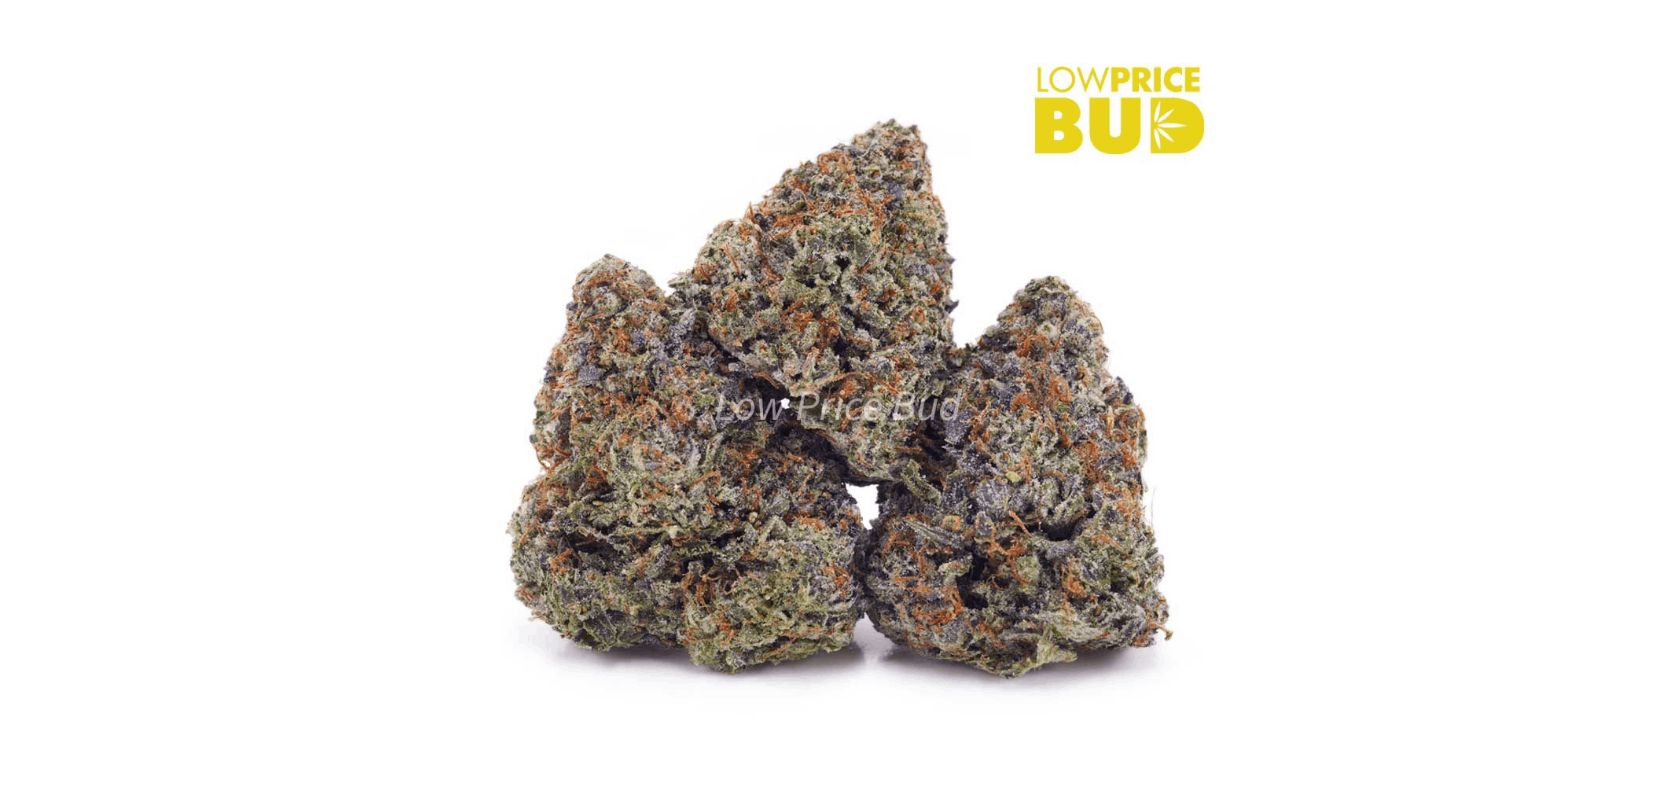 Get this AAAA-grade Death Bubba flower at our online dispensary and enjoy high-quality weed at a cheap price and free Canada-wide shipping for products above $150.